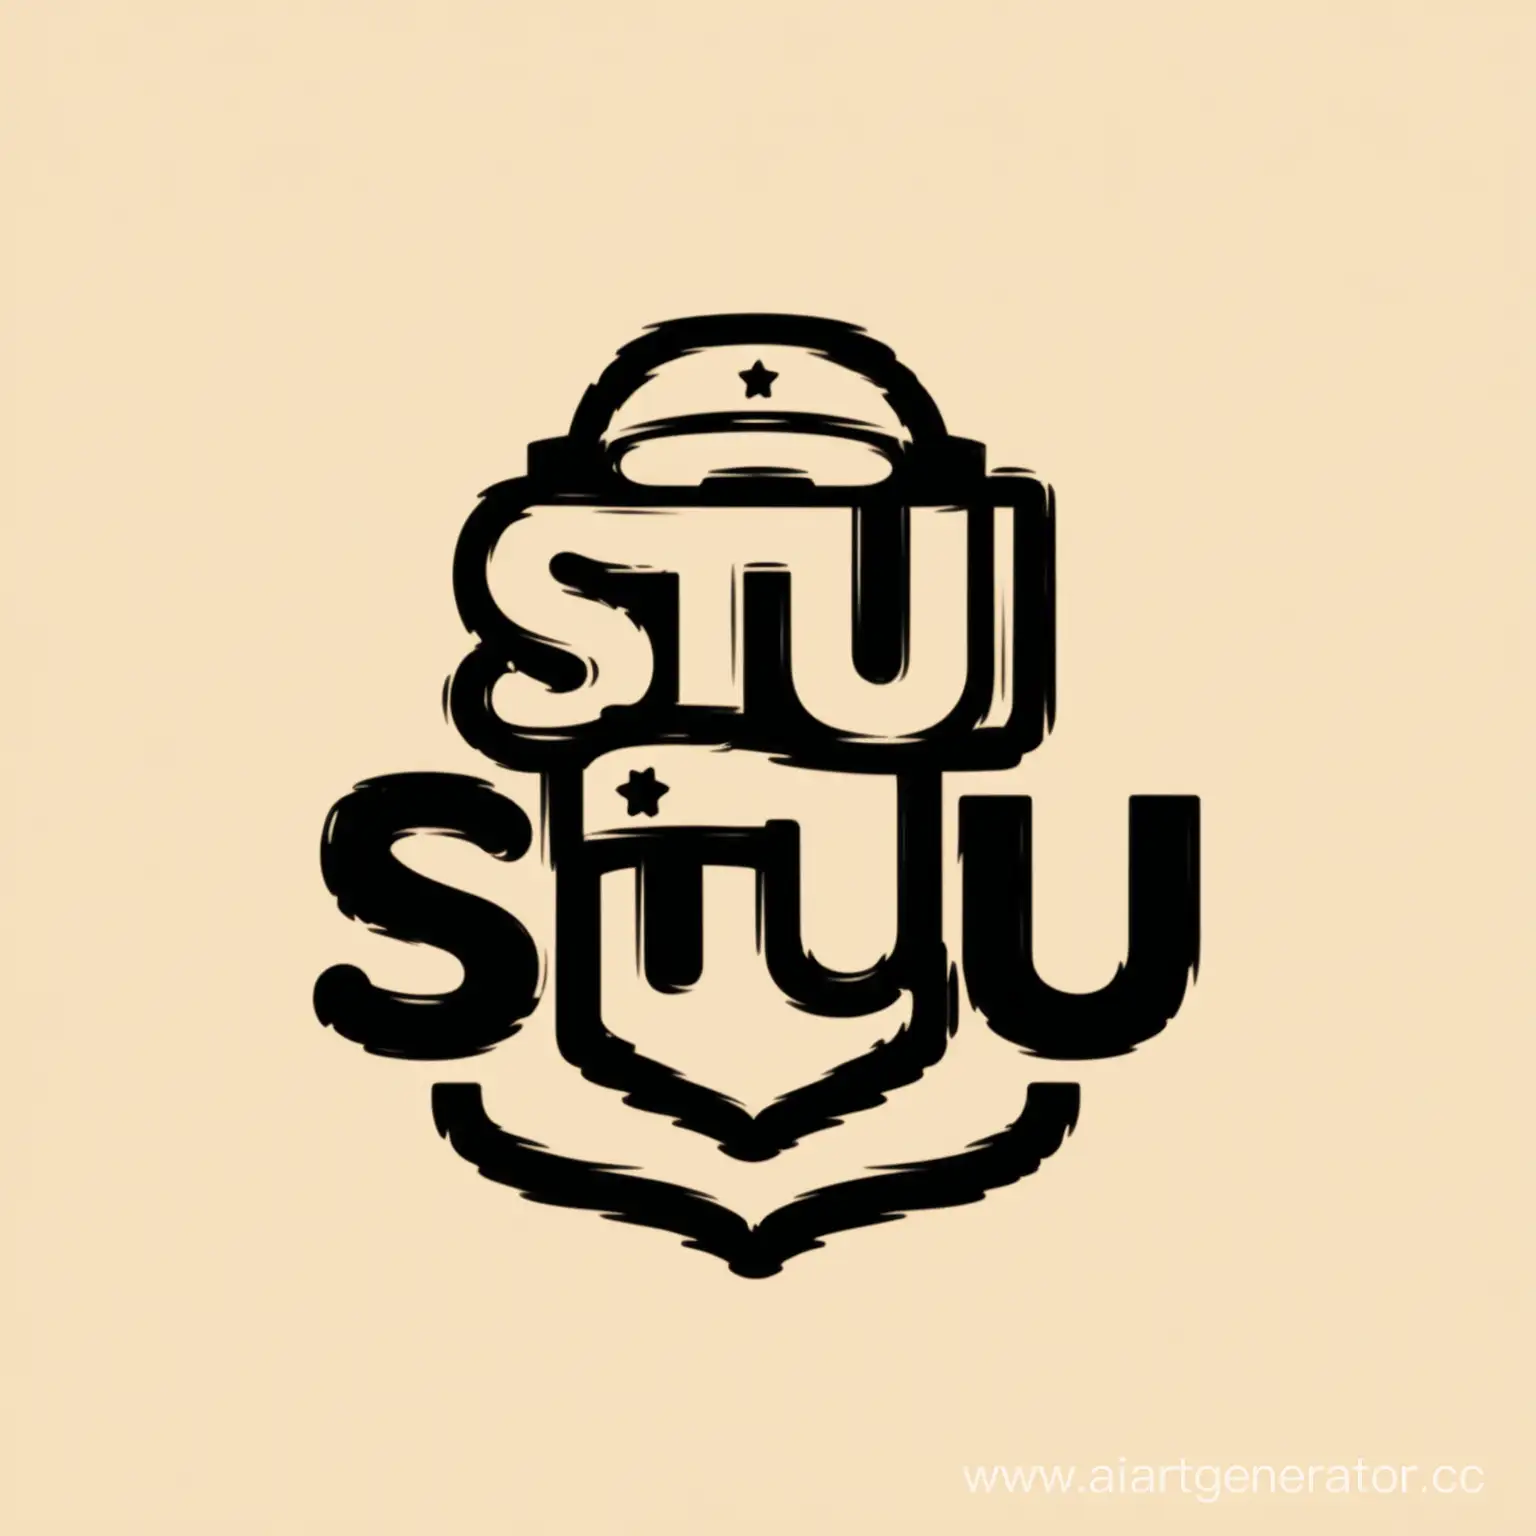 STU-Logo-Design-Abstract-Geometric-Shapes-in-Vibrant-Colors